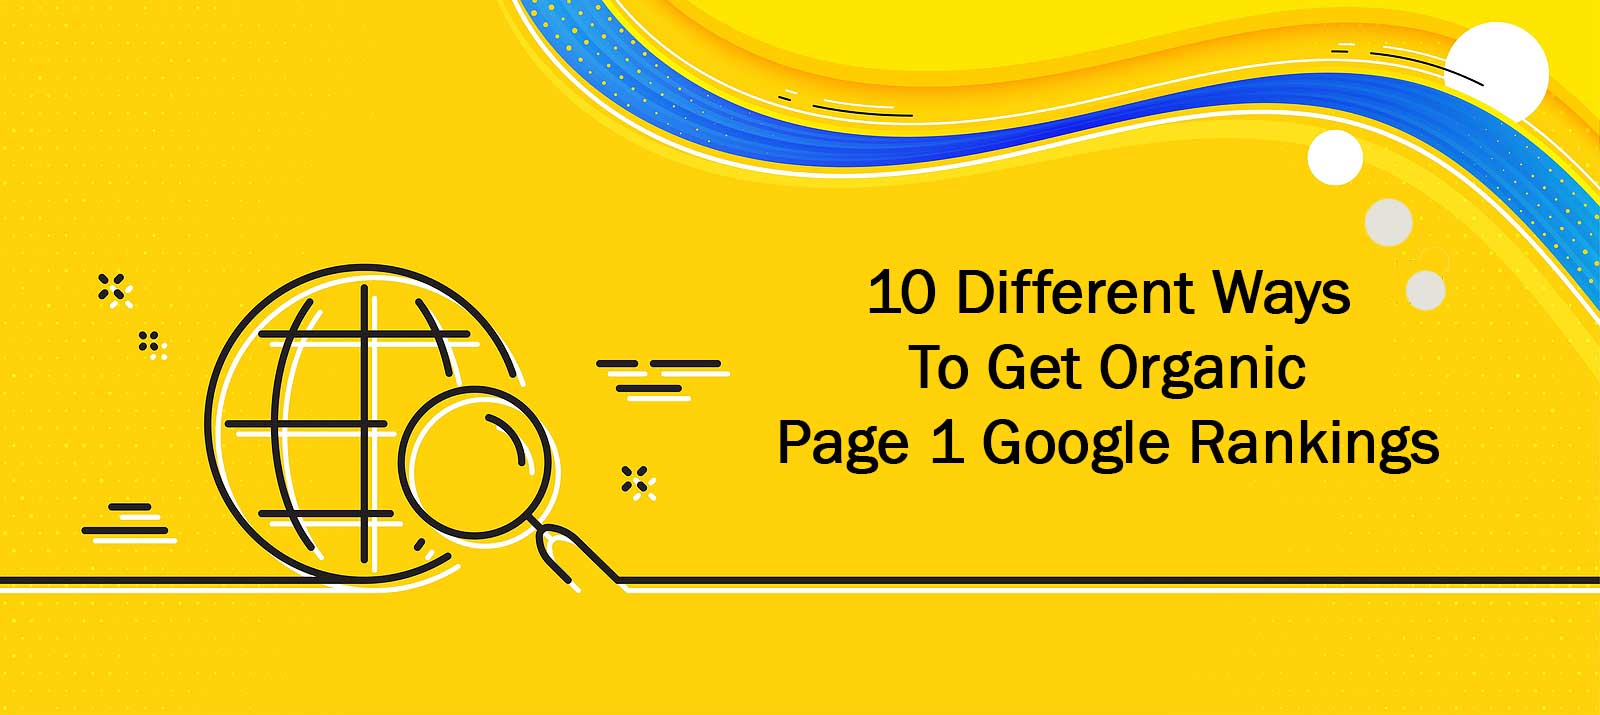 10-Different-Ways-To-Get-Organic-Page-1-Google-Rankings